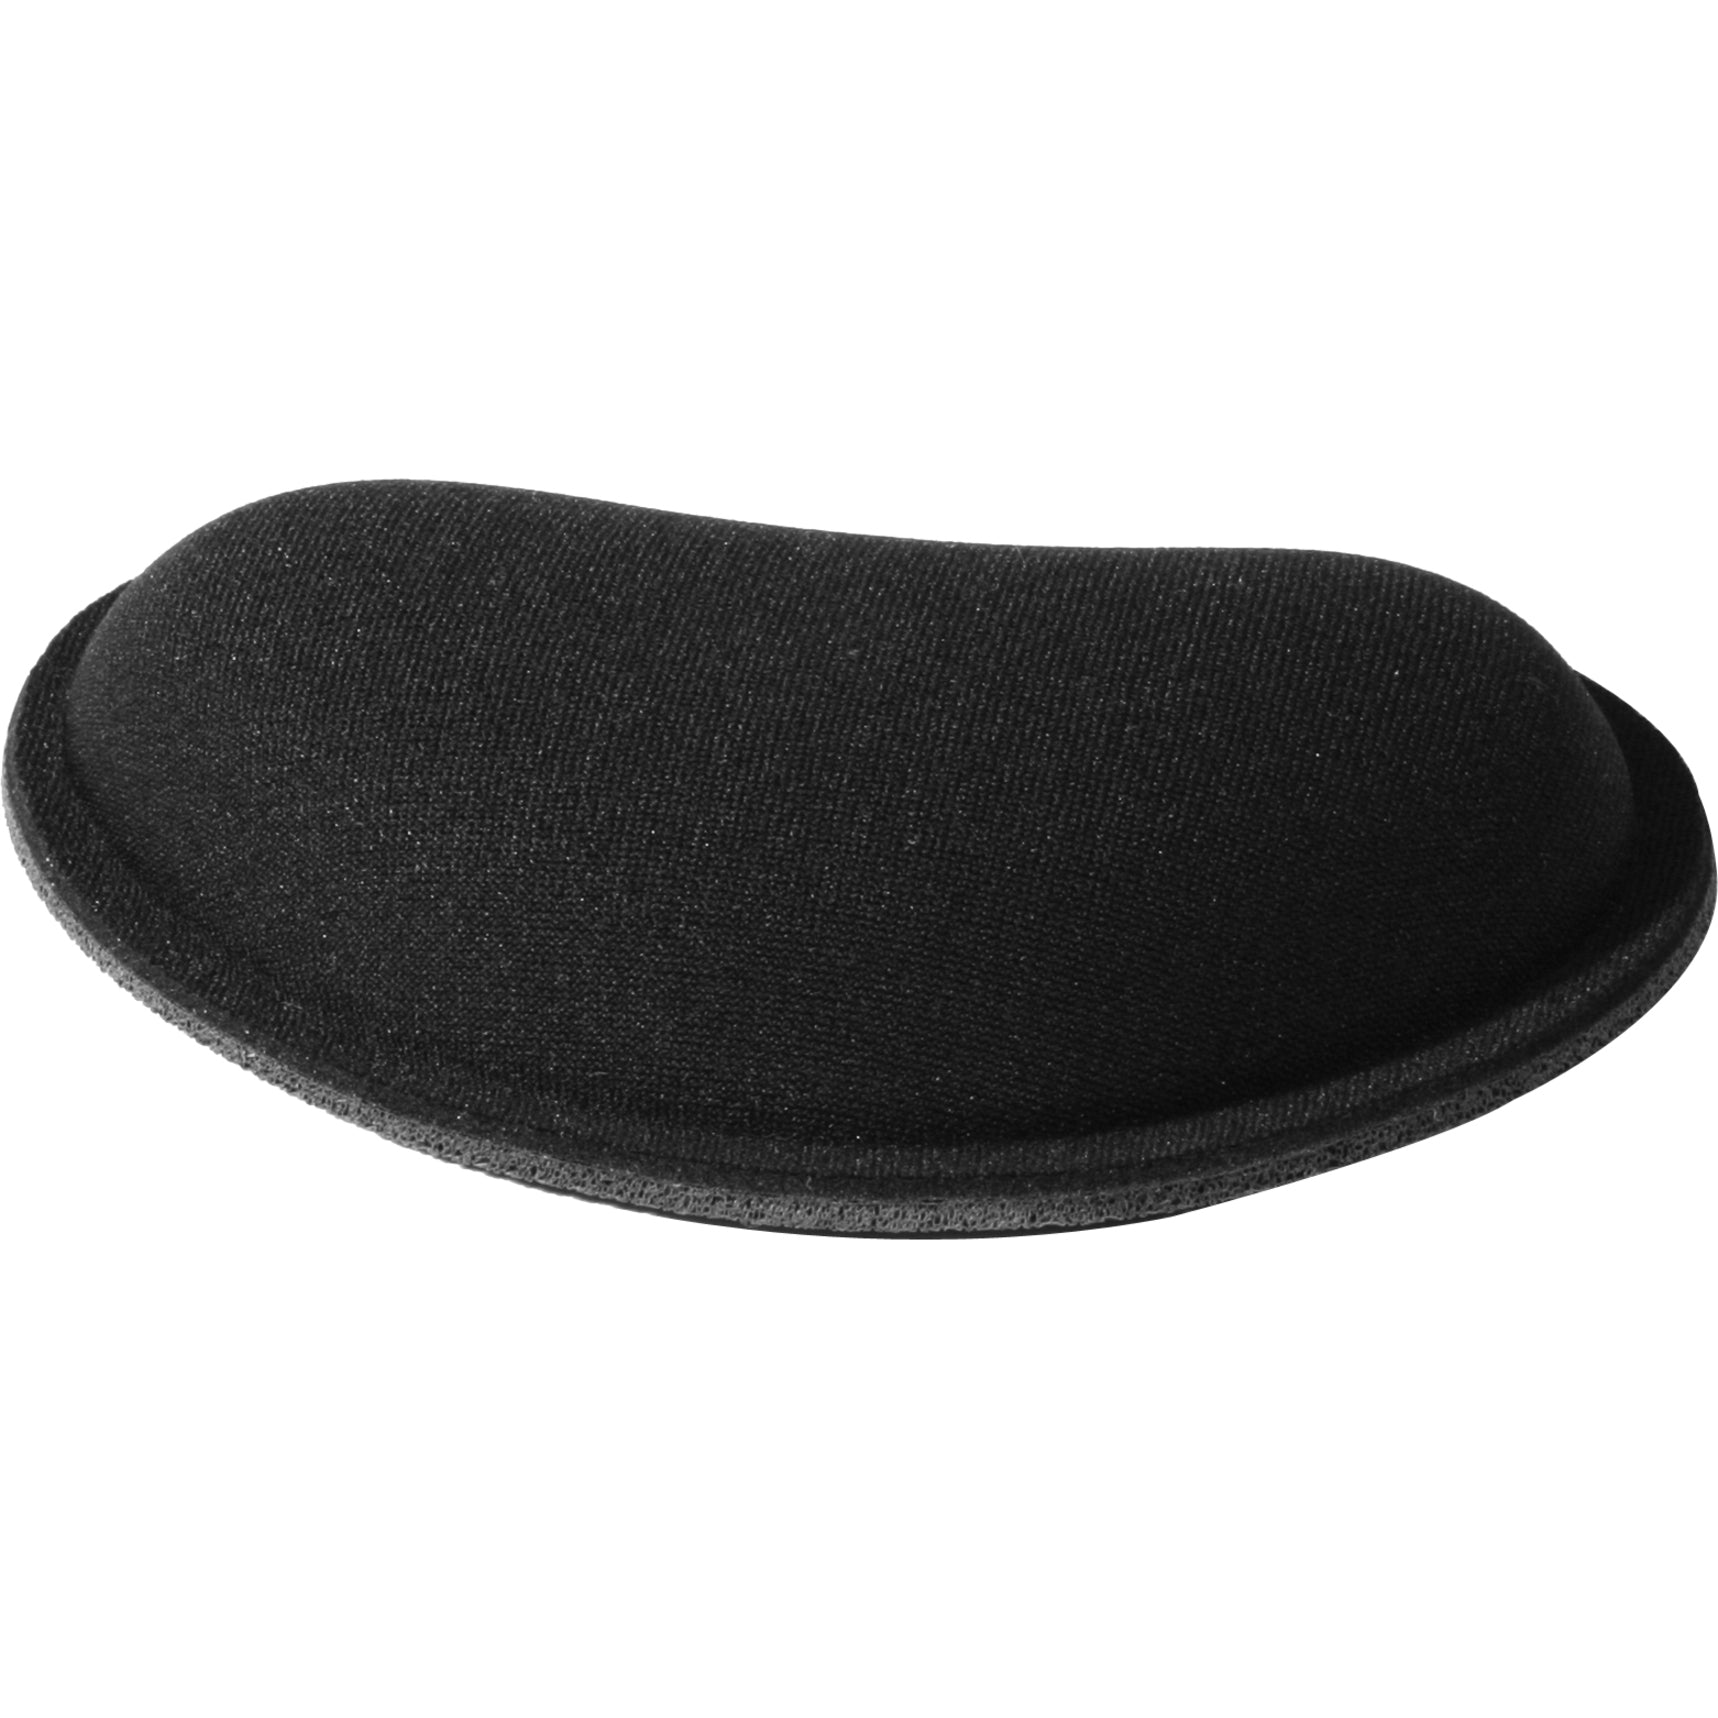 Allsop 30213 Memory Foam Wrist Rest Small - Black, Non-Skid Support for Comfortable Typing